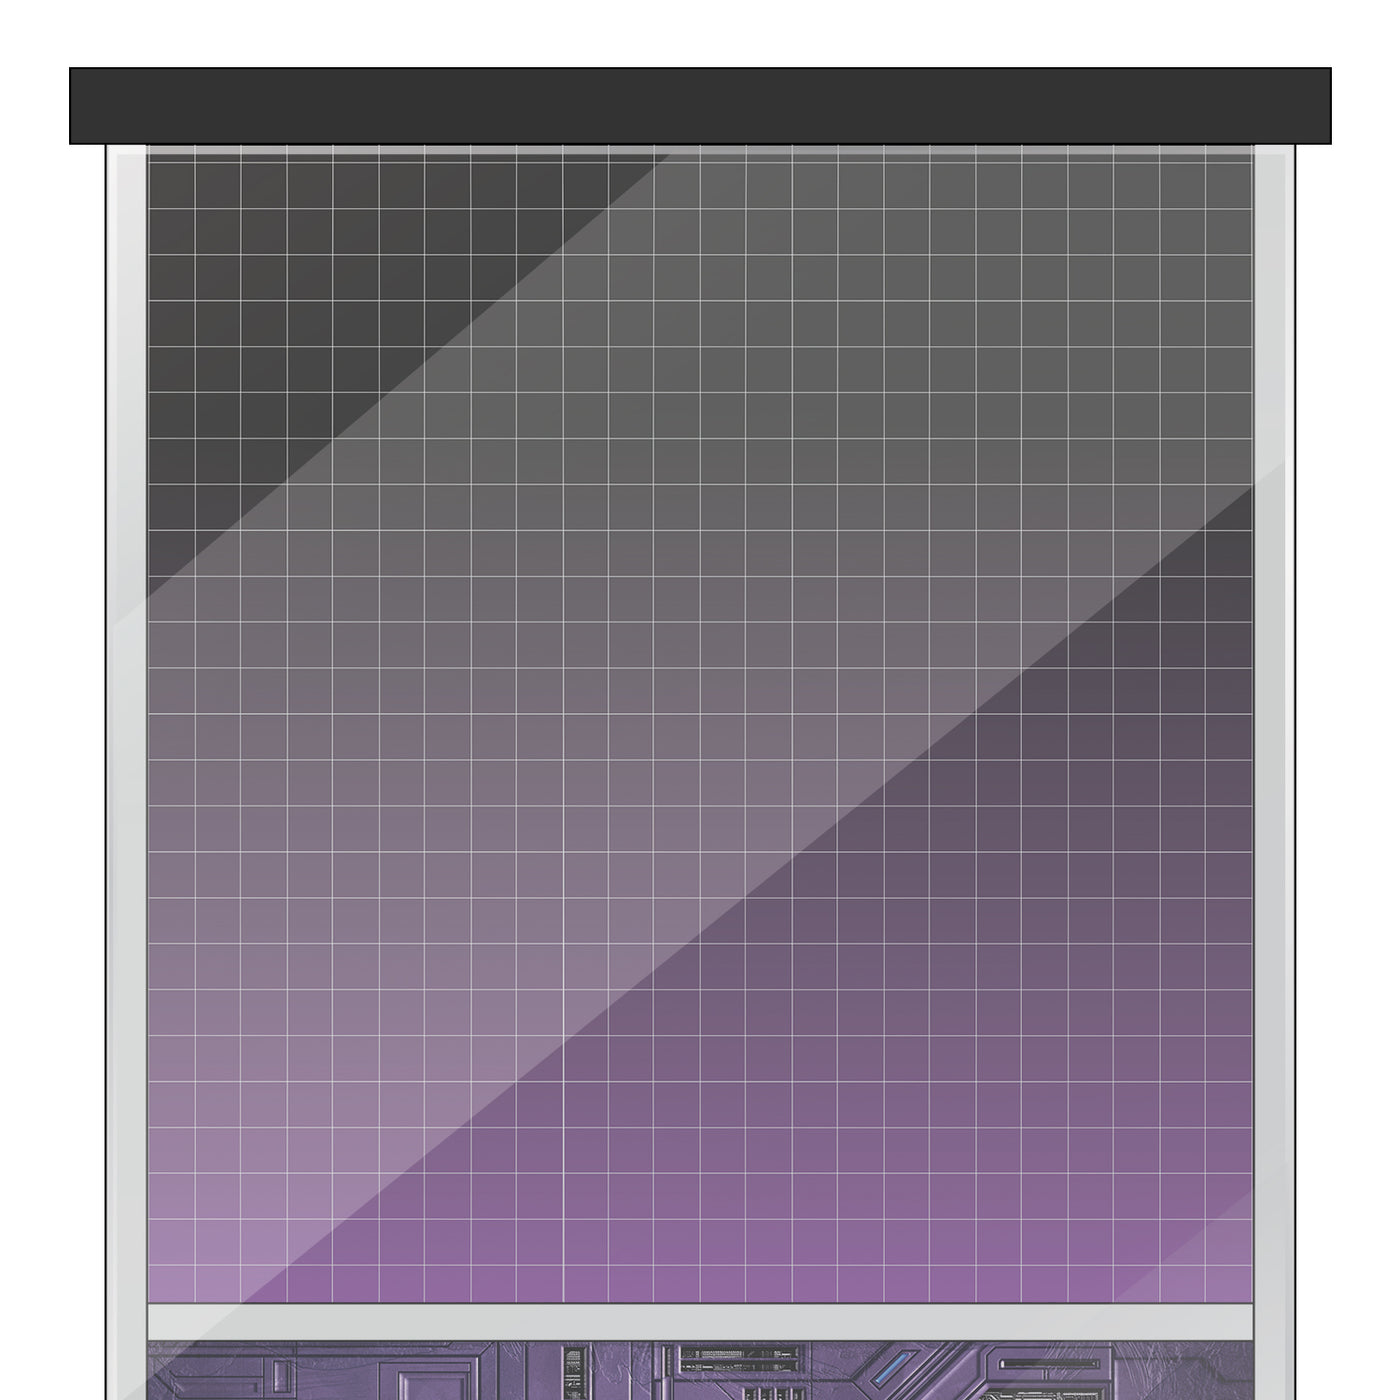 Transformers Grid Themed Background Decals for IKEA Detolf Displays